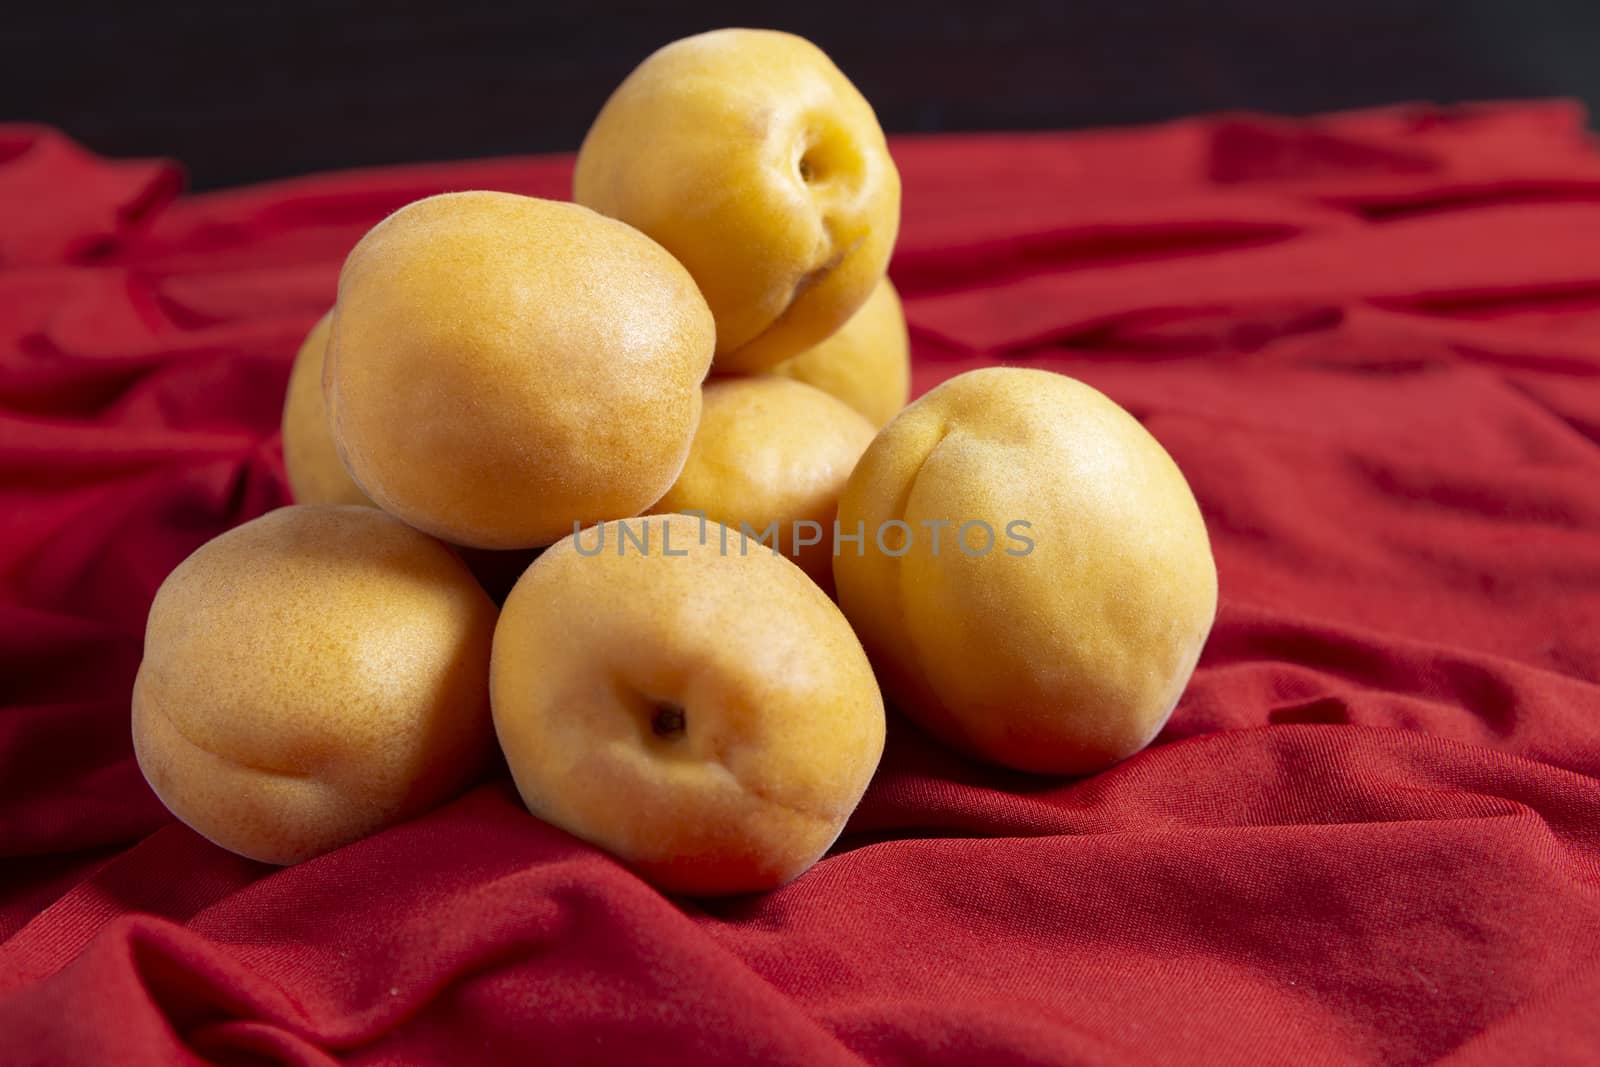 A pile of apricot piles stacked together lie on a red tablecloth against a red background